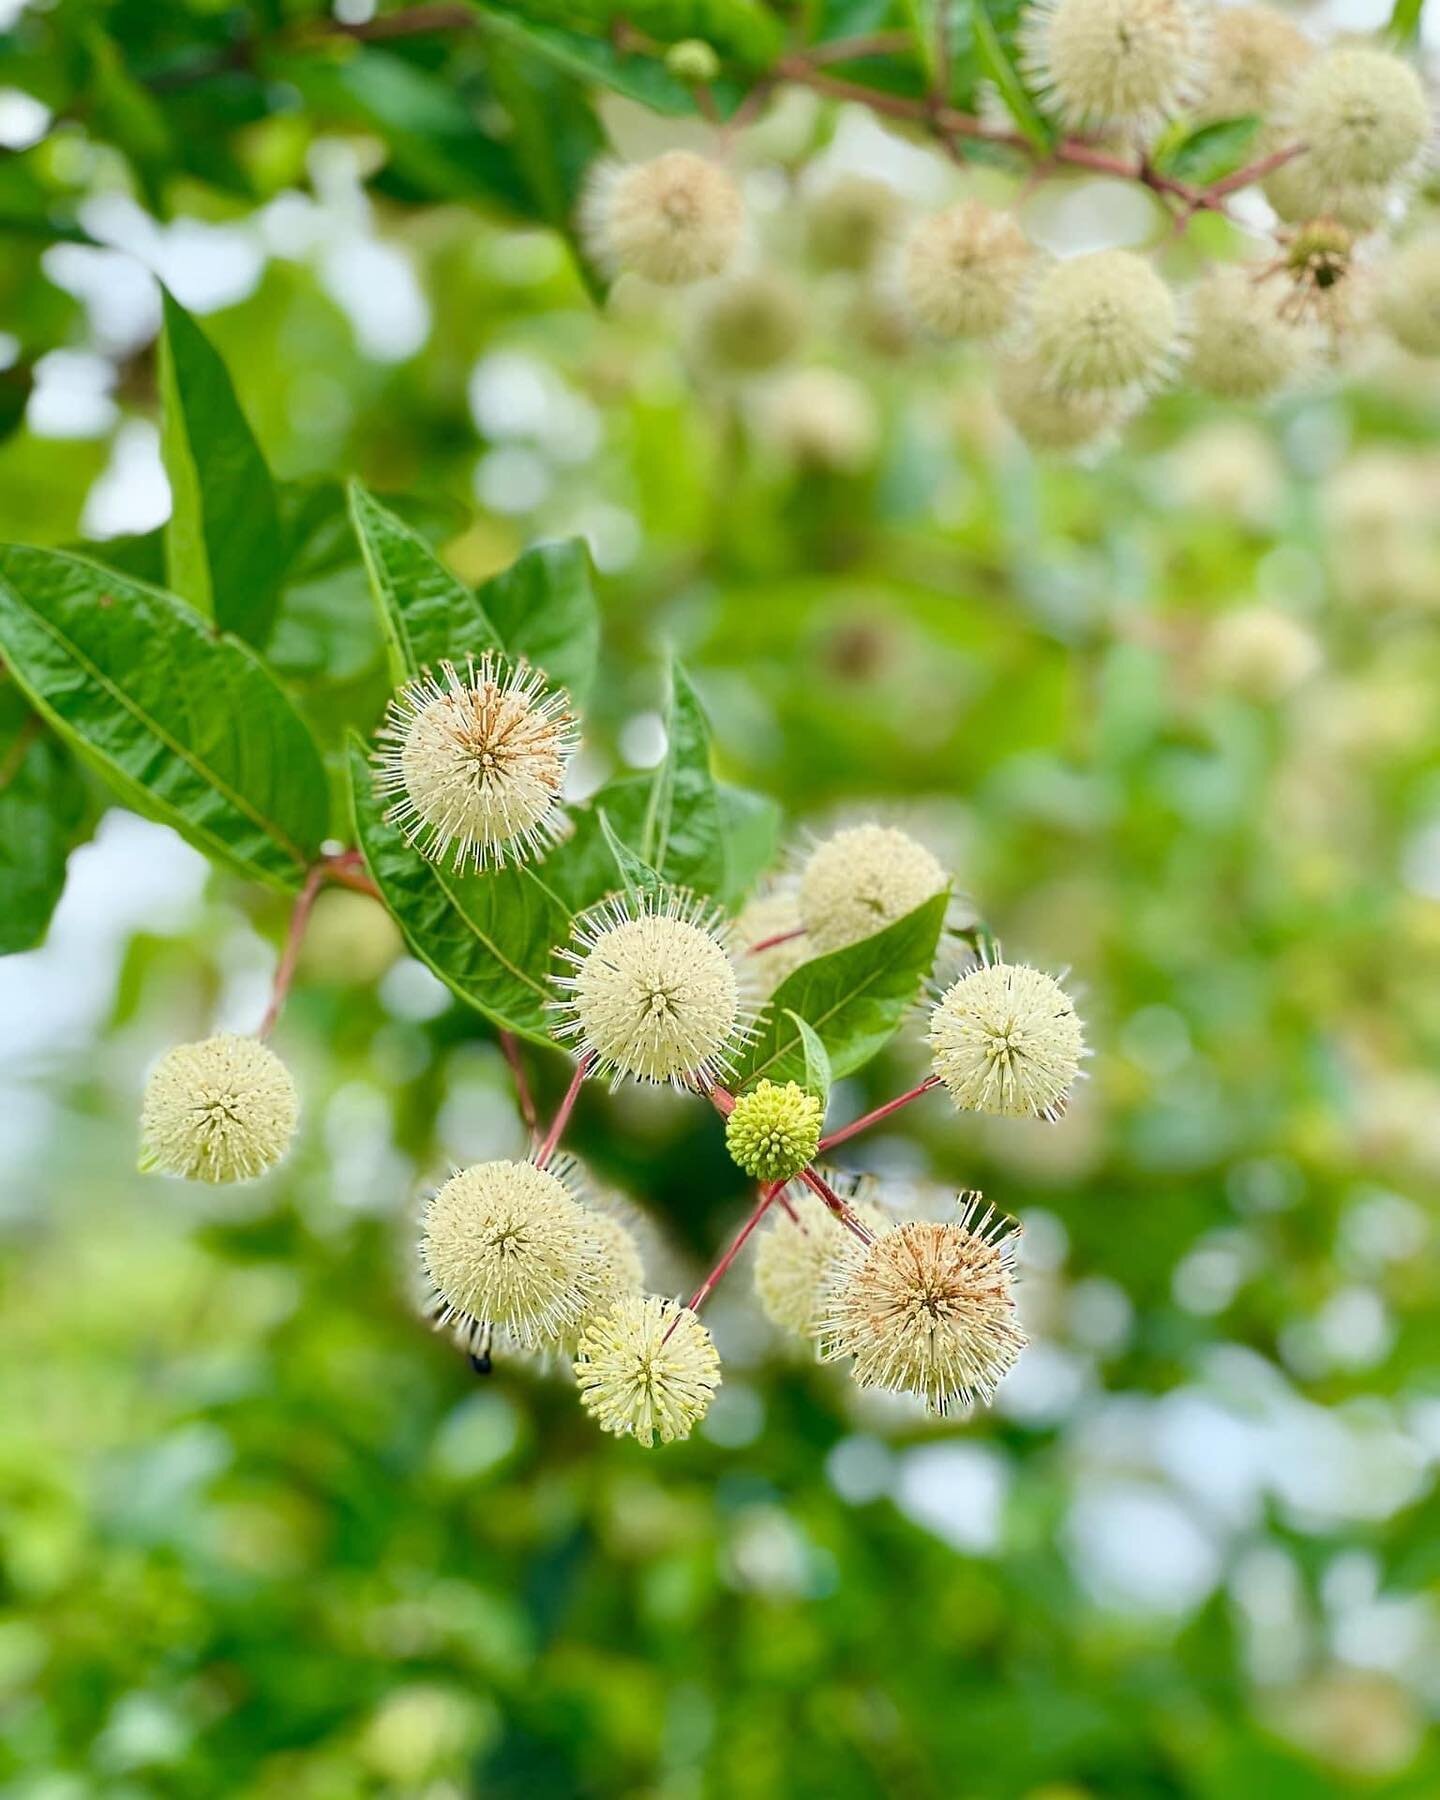 NEW #PhenologyNotes + VIDEO!

Have you witnessed the beautiful Buttonbush blooms these last few weeks? They embody the wild bounty of mid-summer.

These uniquely geometric globes of bright white seem to explode from lush ribbons of green along the sh